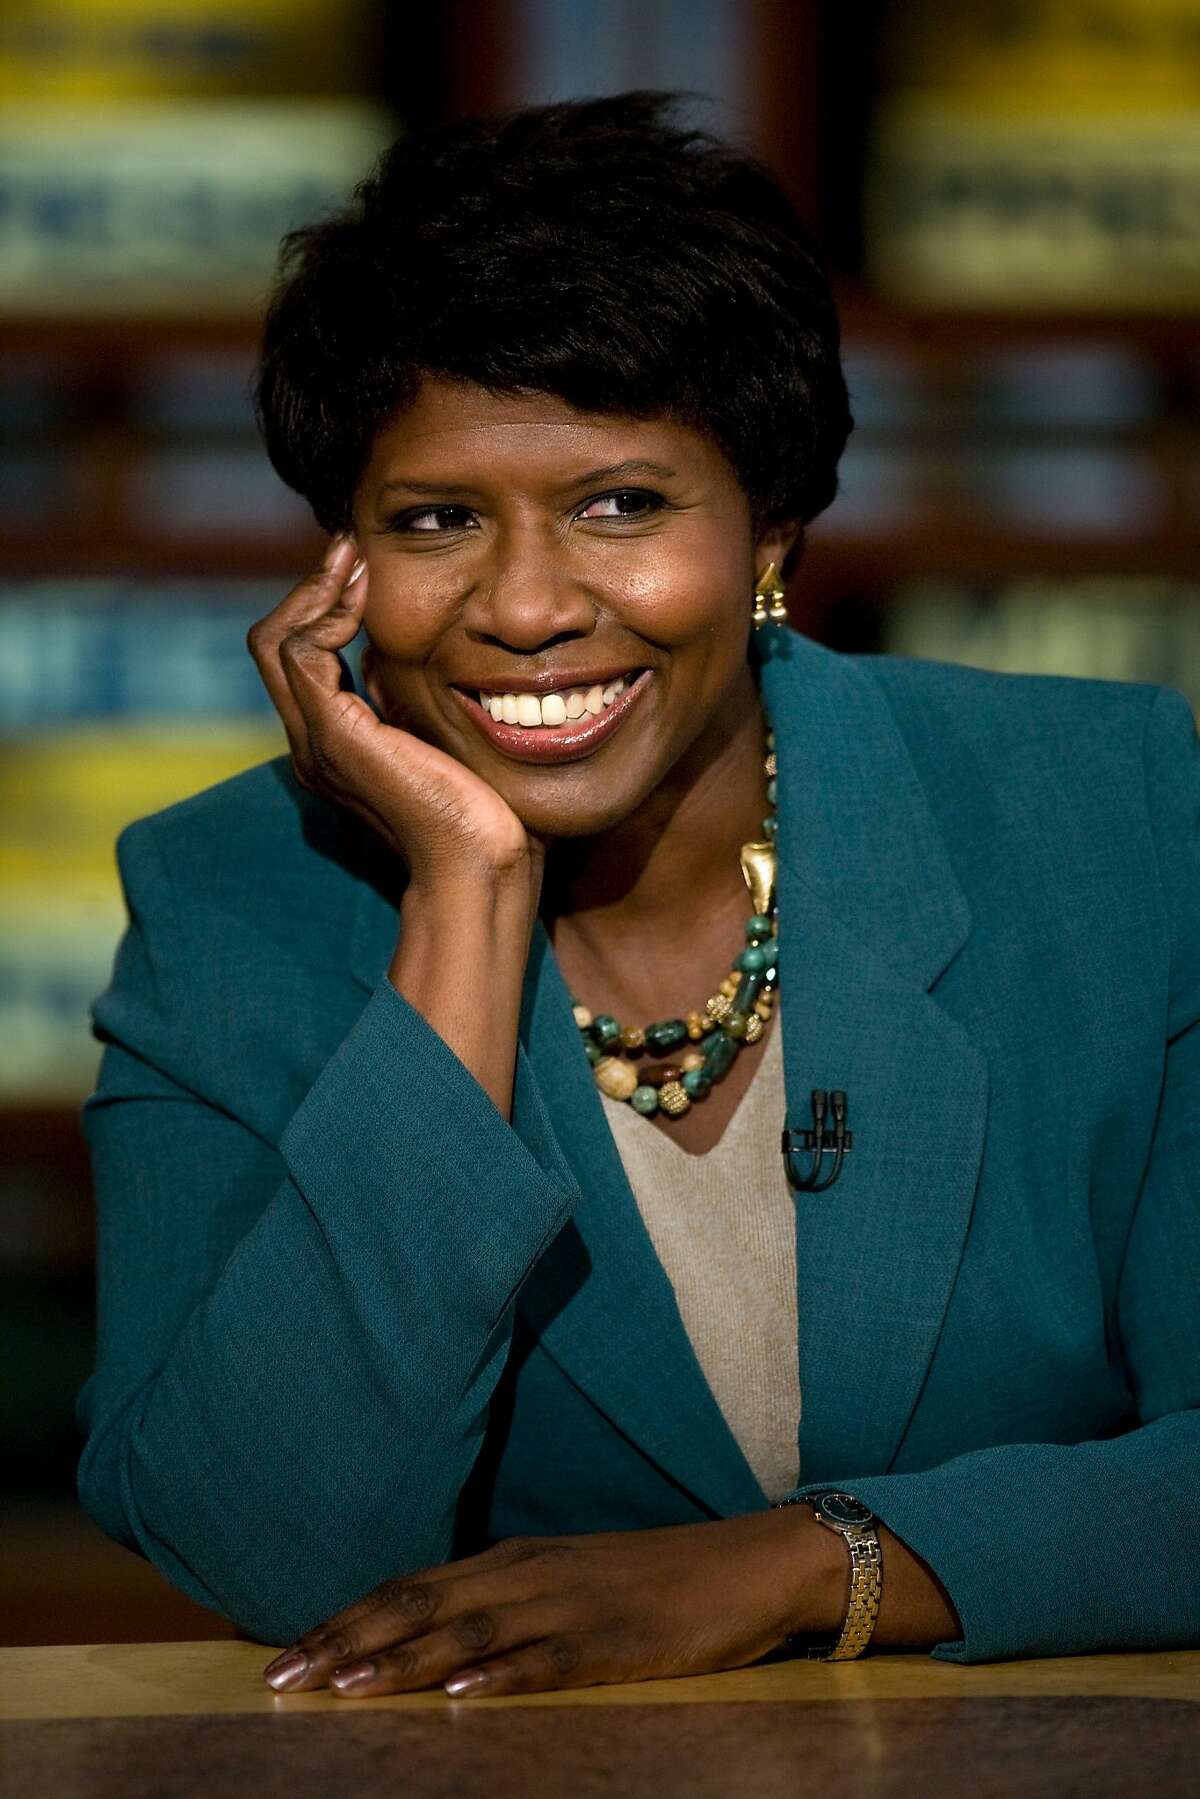 FILE: Long-time PBS journalist Gwen Ifill has died at the age of 61 after battling cancer. WASHINGTON - OCTOBER 5: (AFP OUT) Gwen Ifill of PBS watches a clip of "Saturday Night Live" during a live taping of "Meet the Press" from NBC October 5, 2008 in Washington, DC. Democratic strategist Paul Begala and Republican strategist Mike Murphy spoke about the upcoming US presidential elections while David Gregory of NBC News, Gwen Ifill of PBS, Peggy Noonan of Wall Street Journal, Chuck Todd of NBC News, and David Yepsen of the Des Moines Register participated in a roundtable to also speak about the election. (Photo by Brendan Smialowski/Getty Images for Meet The Press)